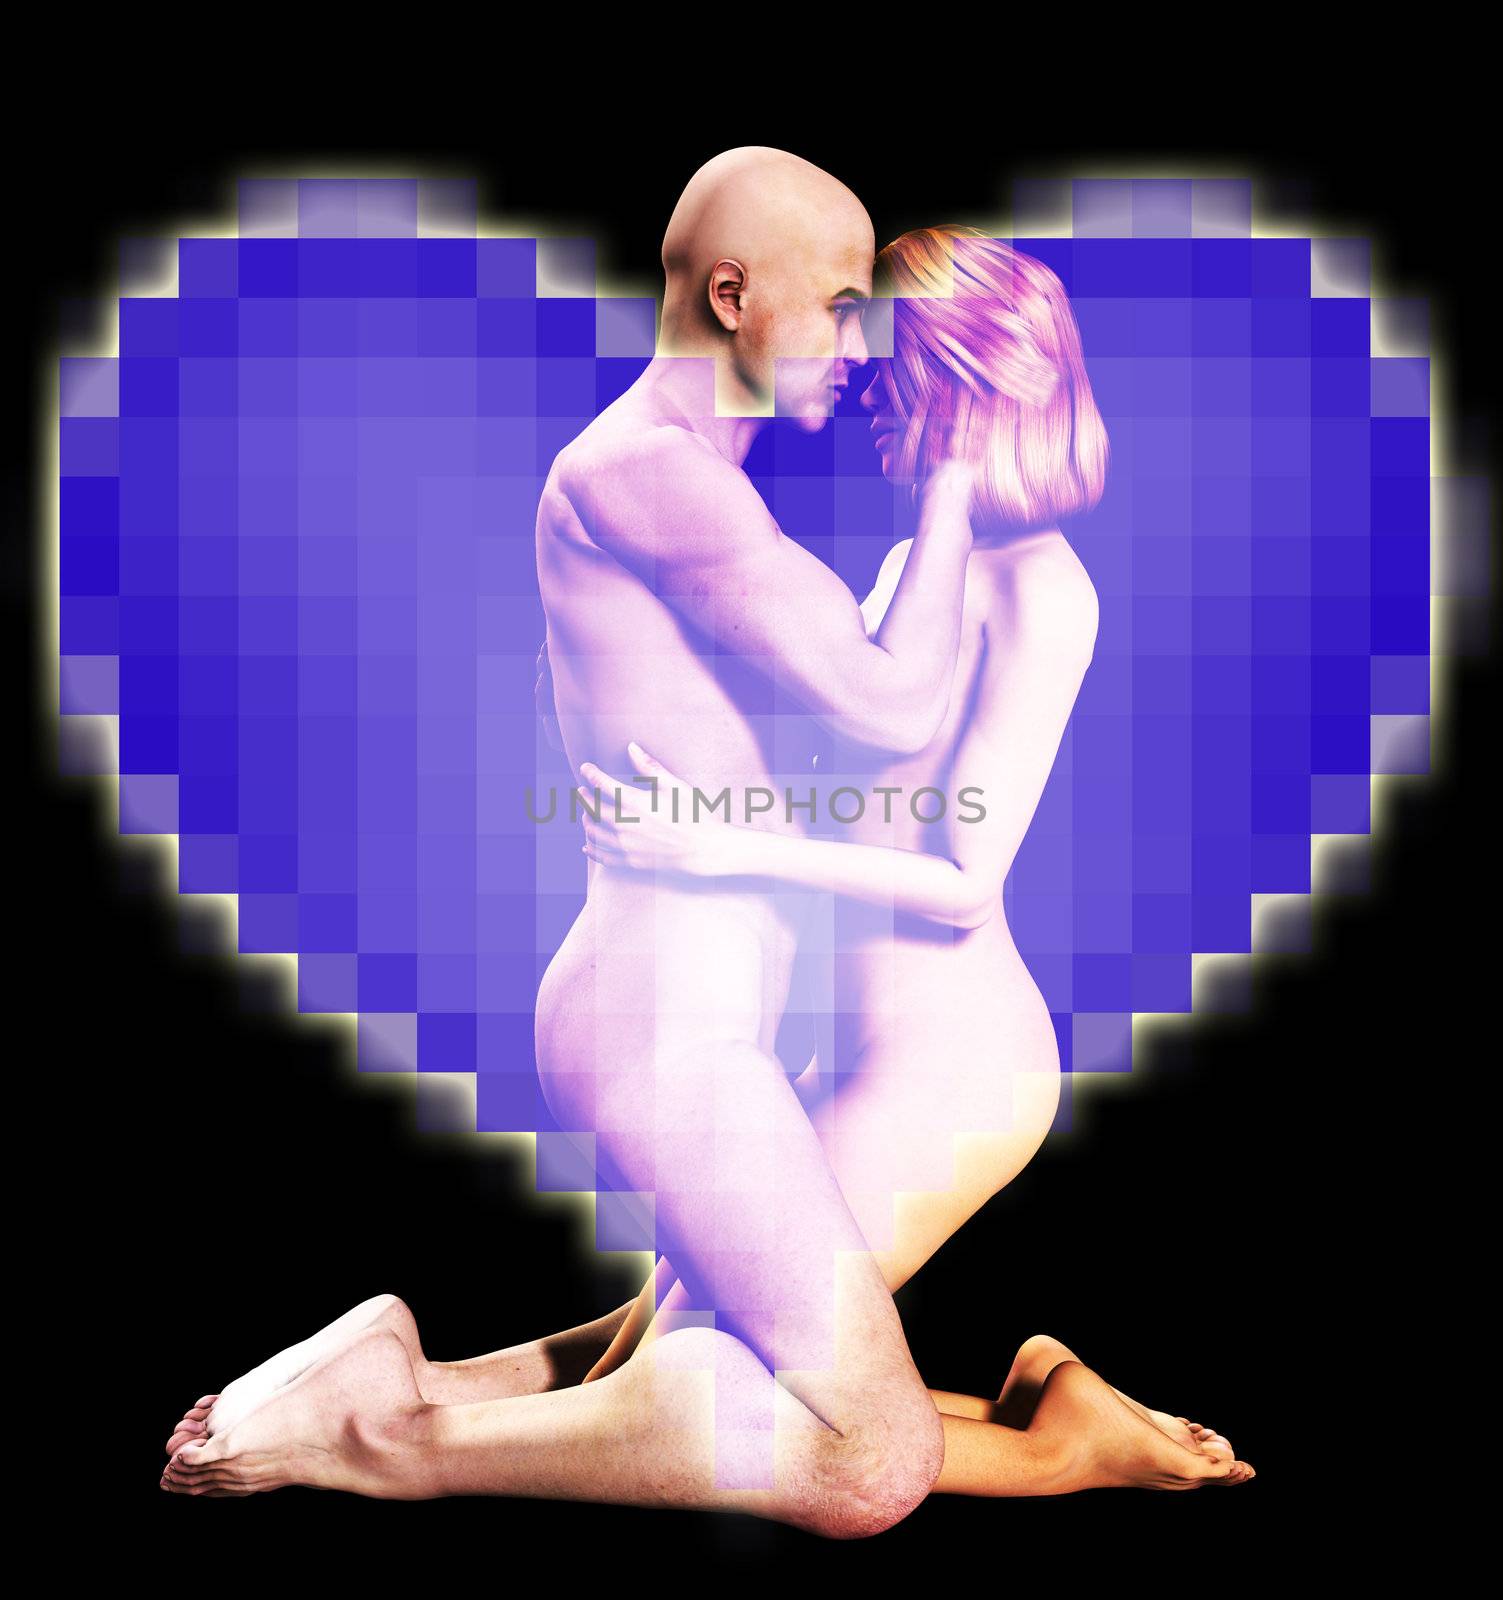 Nude Man And Women In Love by harveysart